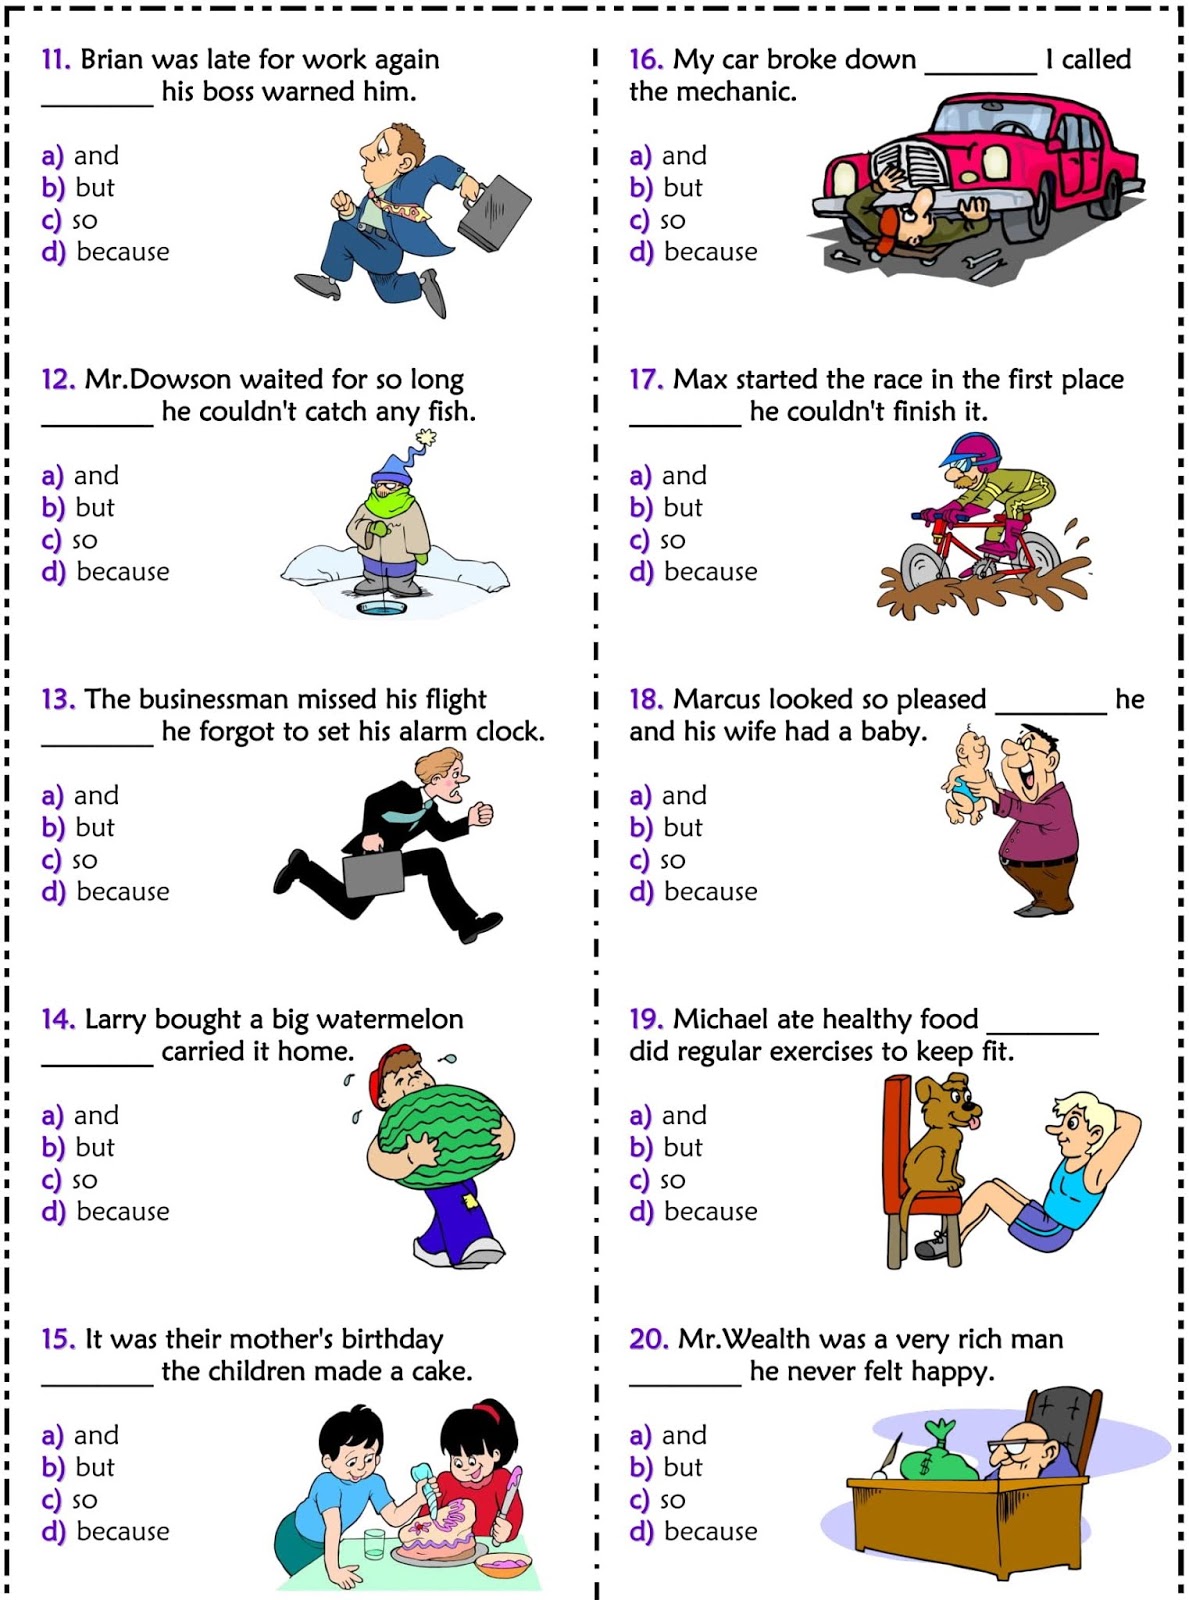 Conjunction And But So Because Exercises English Grammar A To Z